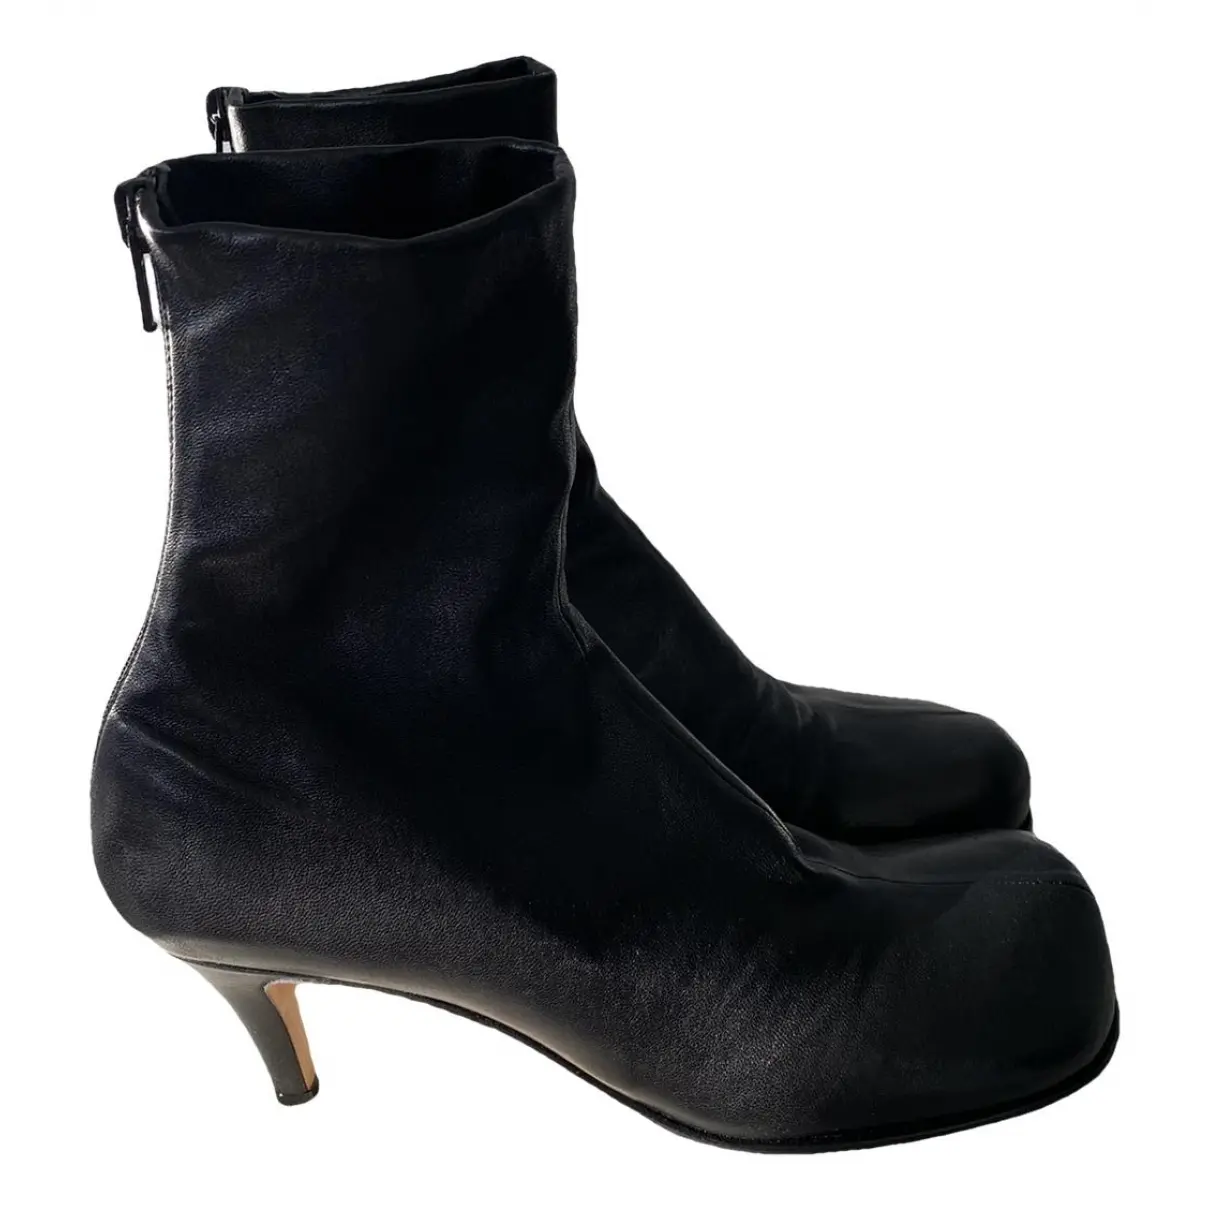 Bold leather ankle boots